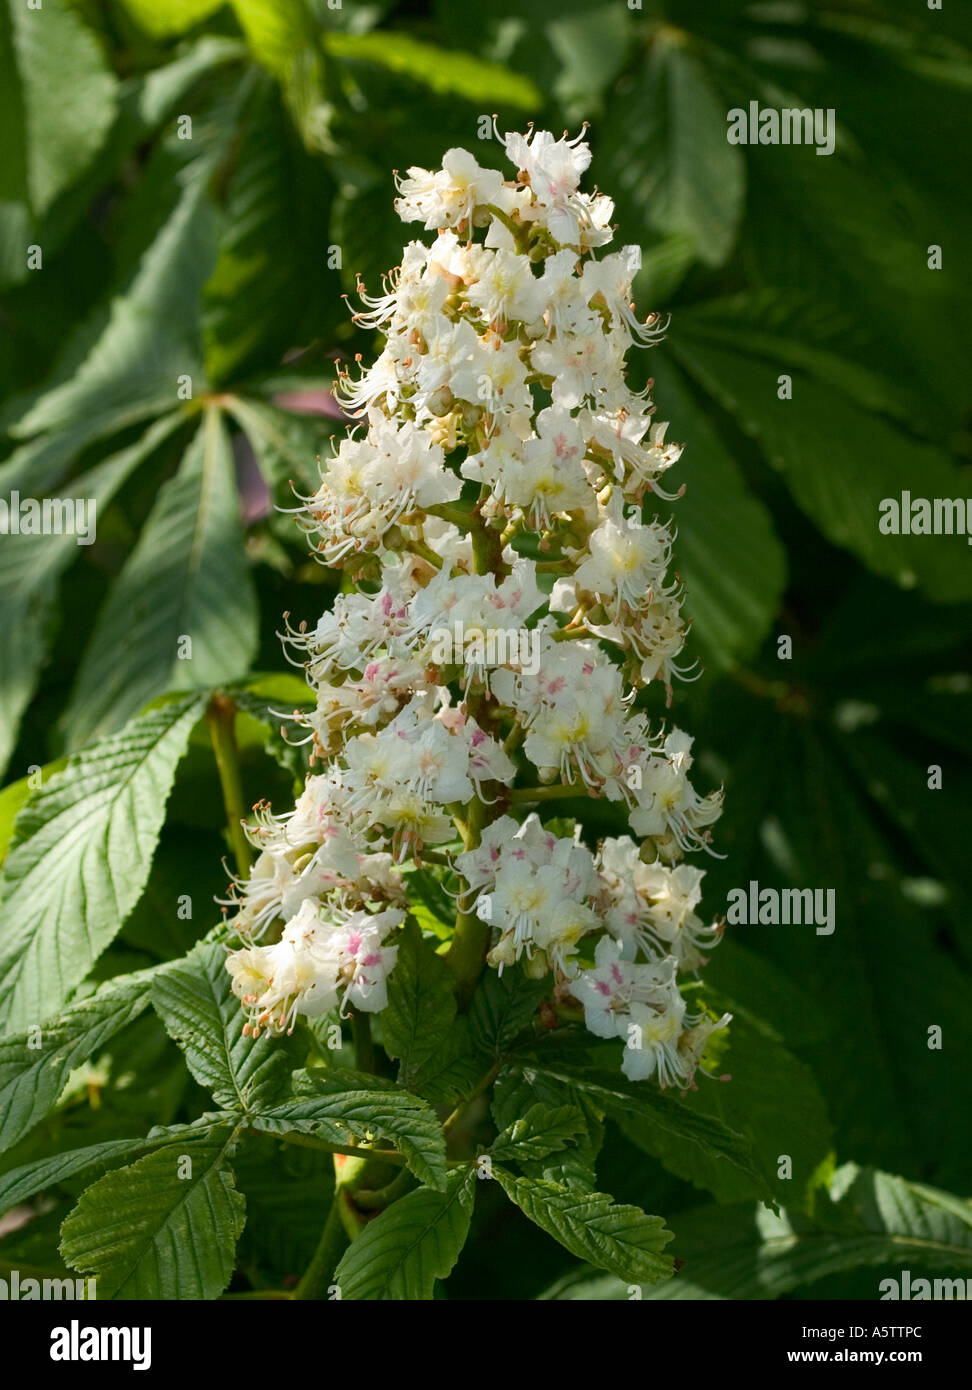 Natural shot of a Horse chestnut tree in flower. Stock Photo